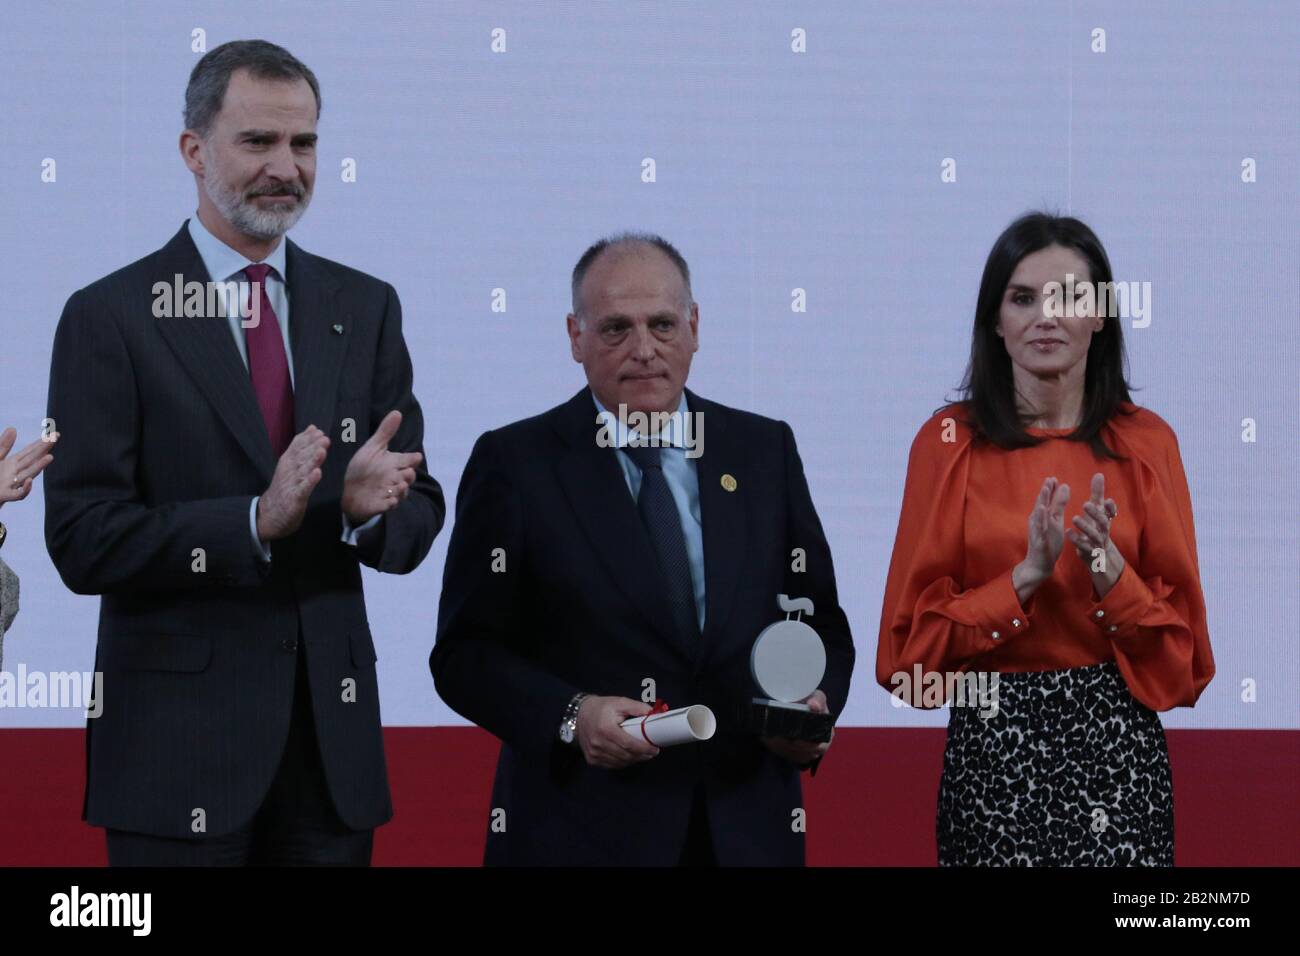 Madrid, Spain; 03/03/2020.- Javier Tebas 'La Liga' president.Kings of Spain Felipe VI and Leizia presided over the eighth delivery of honorary ambassadors of the Spain Brand to Ana Botín president of the Santander bank in the business management category, Isabel Coixet film director in the art and culture category, Carolina Marín Spanish badminton player in the Sports category for being the youngest world champion in Europe (absent), Francisco Mojica microbiologist, researcher and Spanish professor in the Department of Physiology, Genetics and Microbiology at the University of Alicante, scienc Stock Photo